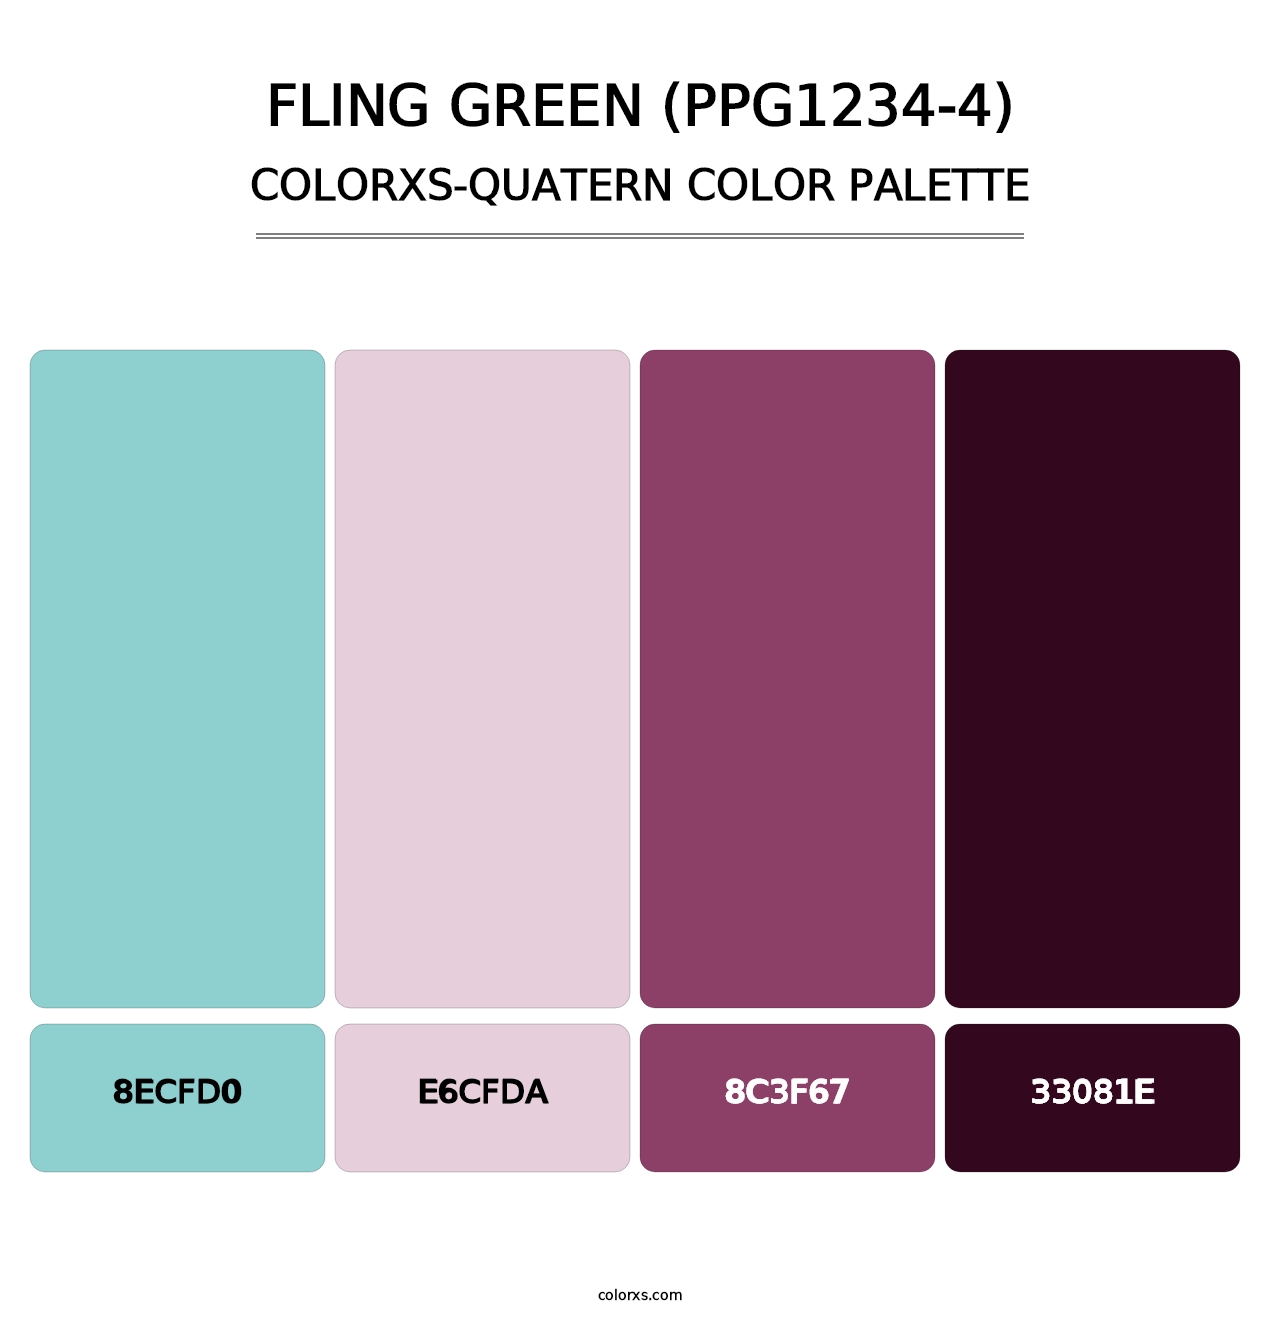 Fling Green (PPG1234-4) - Colorxs Quatern Palette